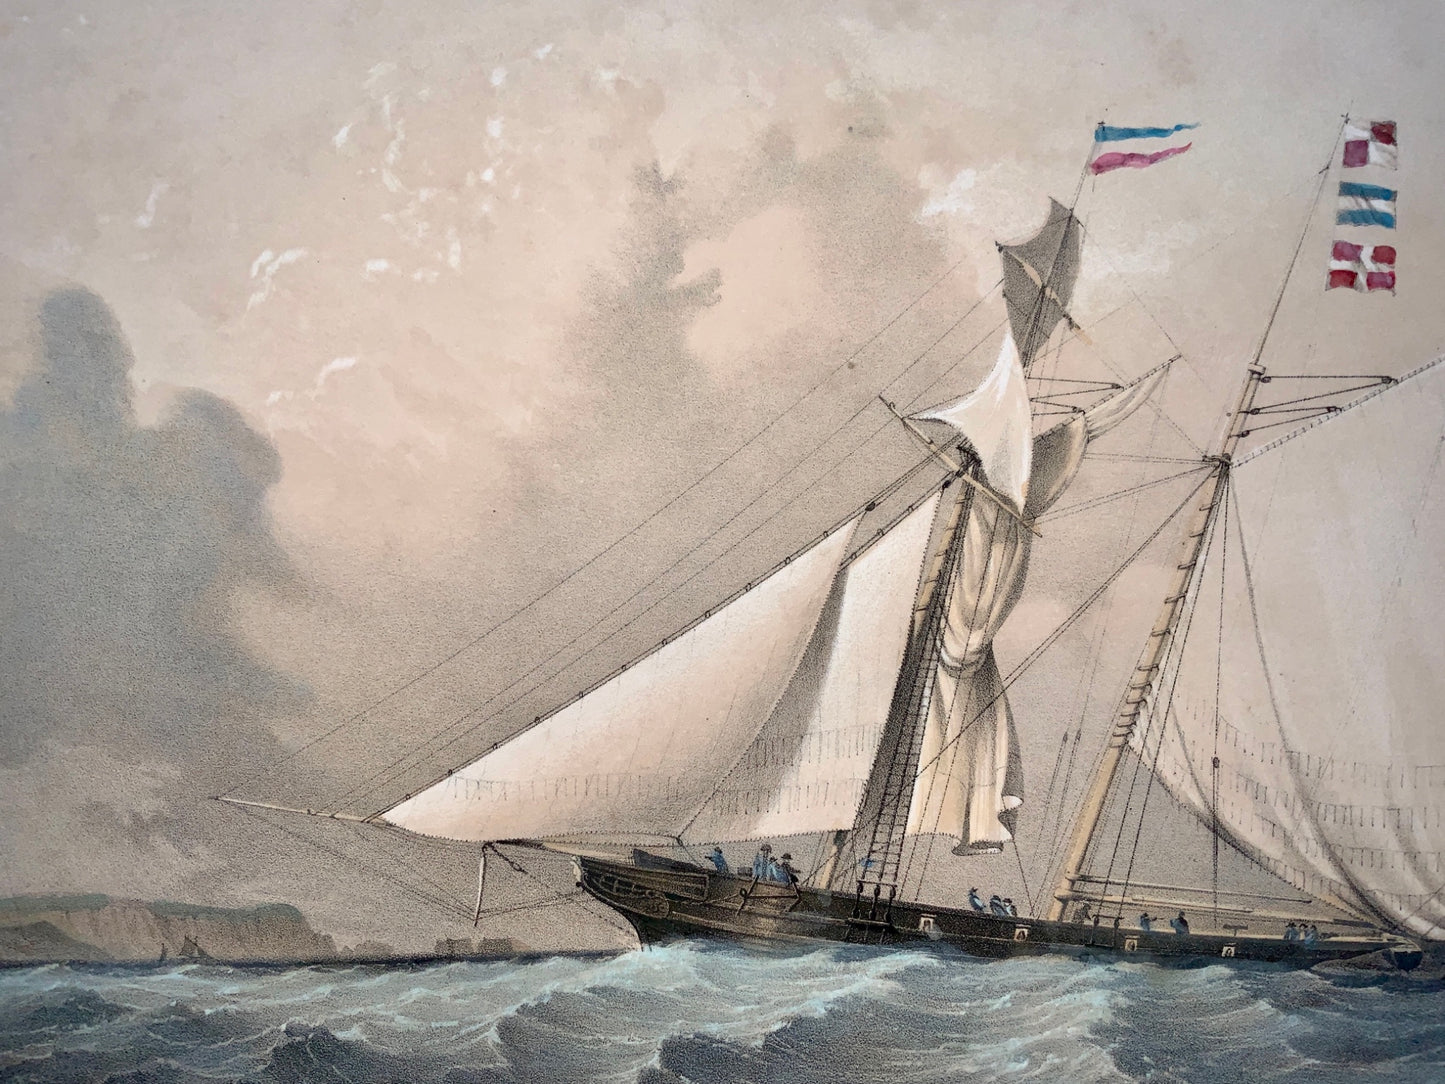 1850c Staines, F W; Day & Haghe Large stone Lithograph HARRIET SCHOONER Sailing - Maritime